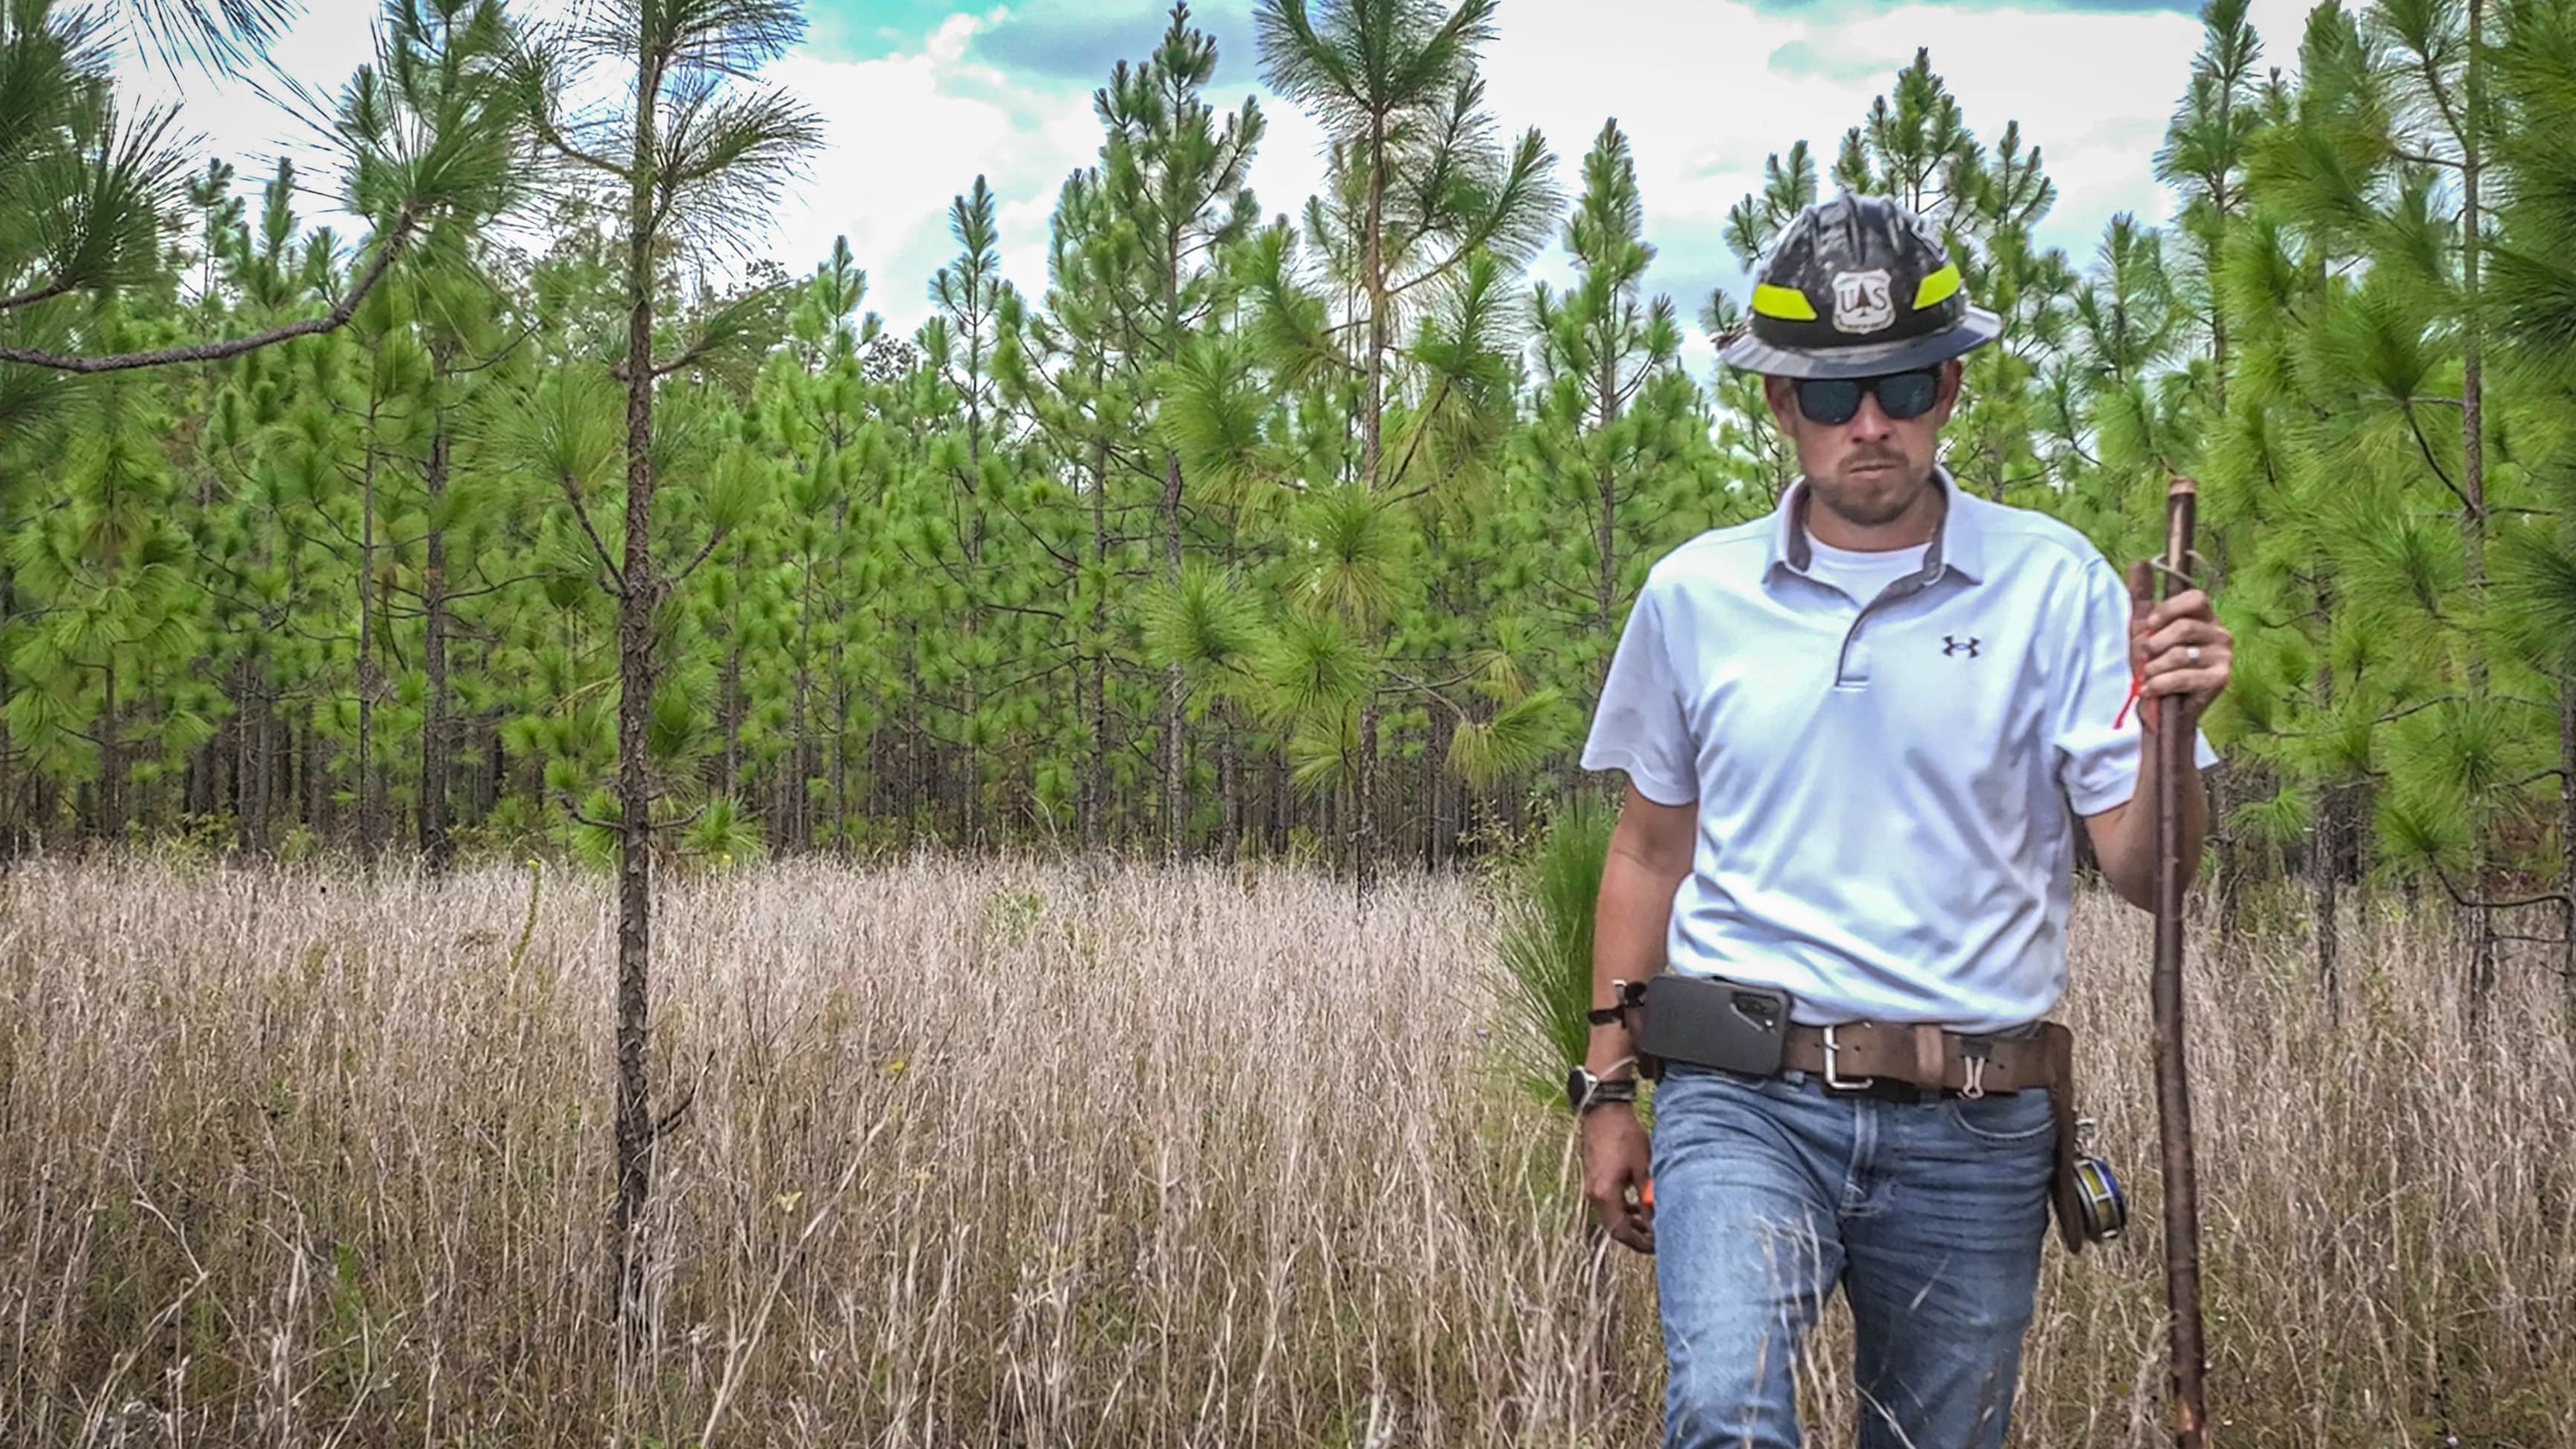 A man in jeans, a tee shirt and hard hat walks through high grass in a pine forest.